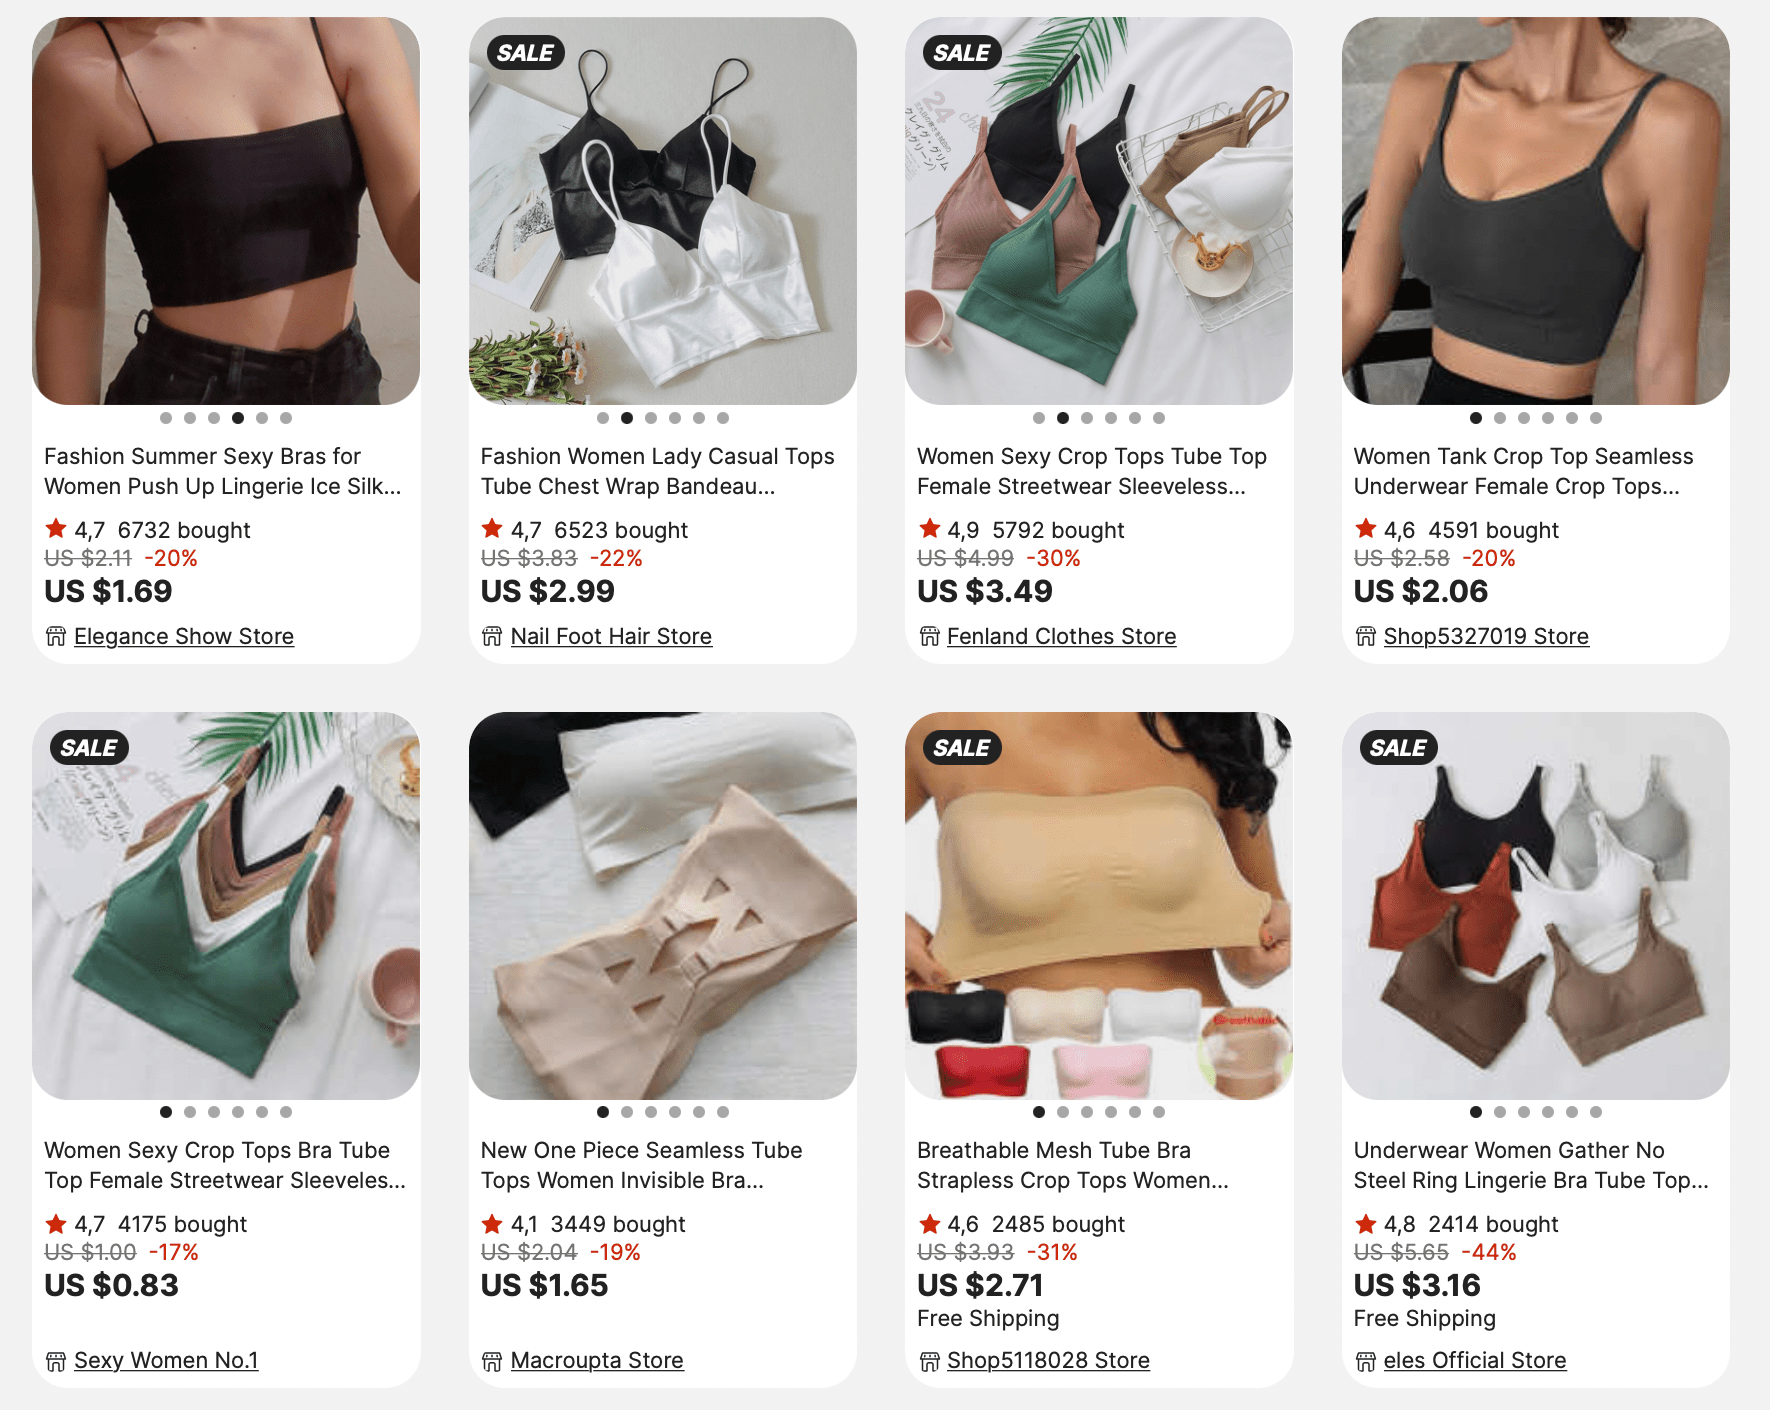 Sexy Bra And Underwear Without Steel Rings Gather And Wrap Up The